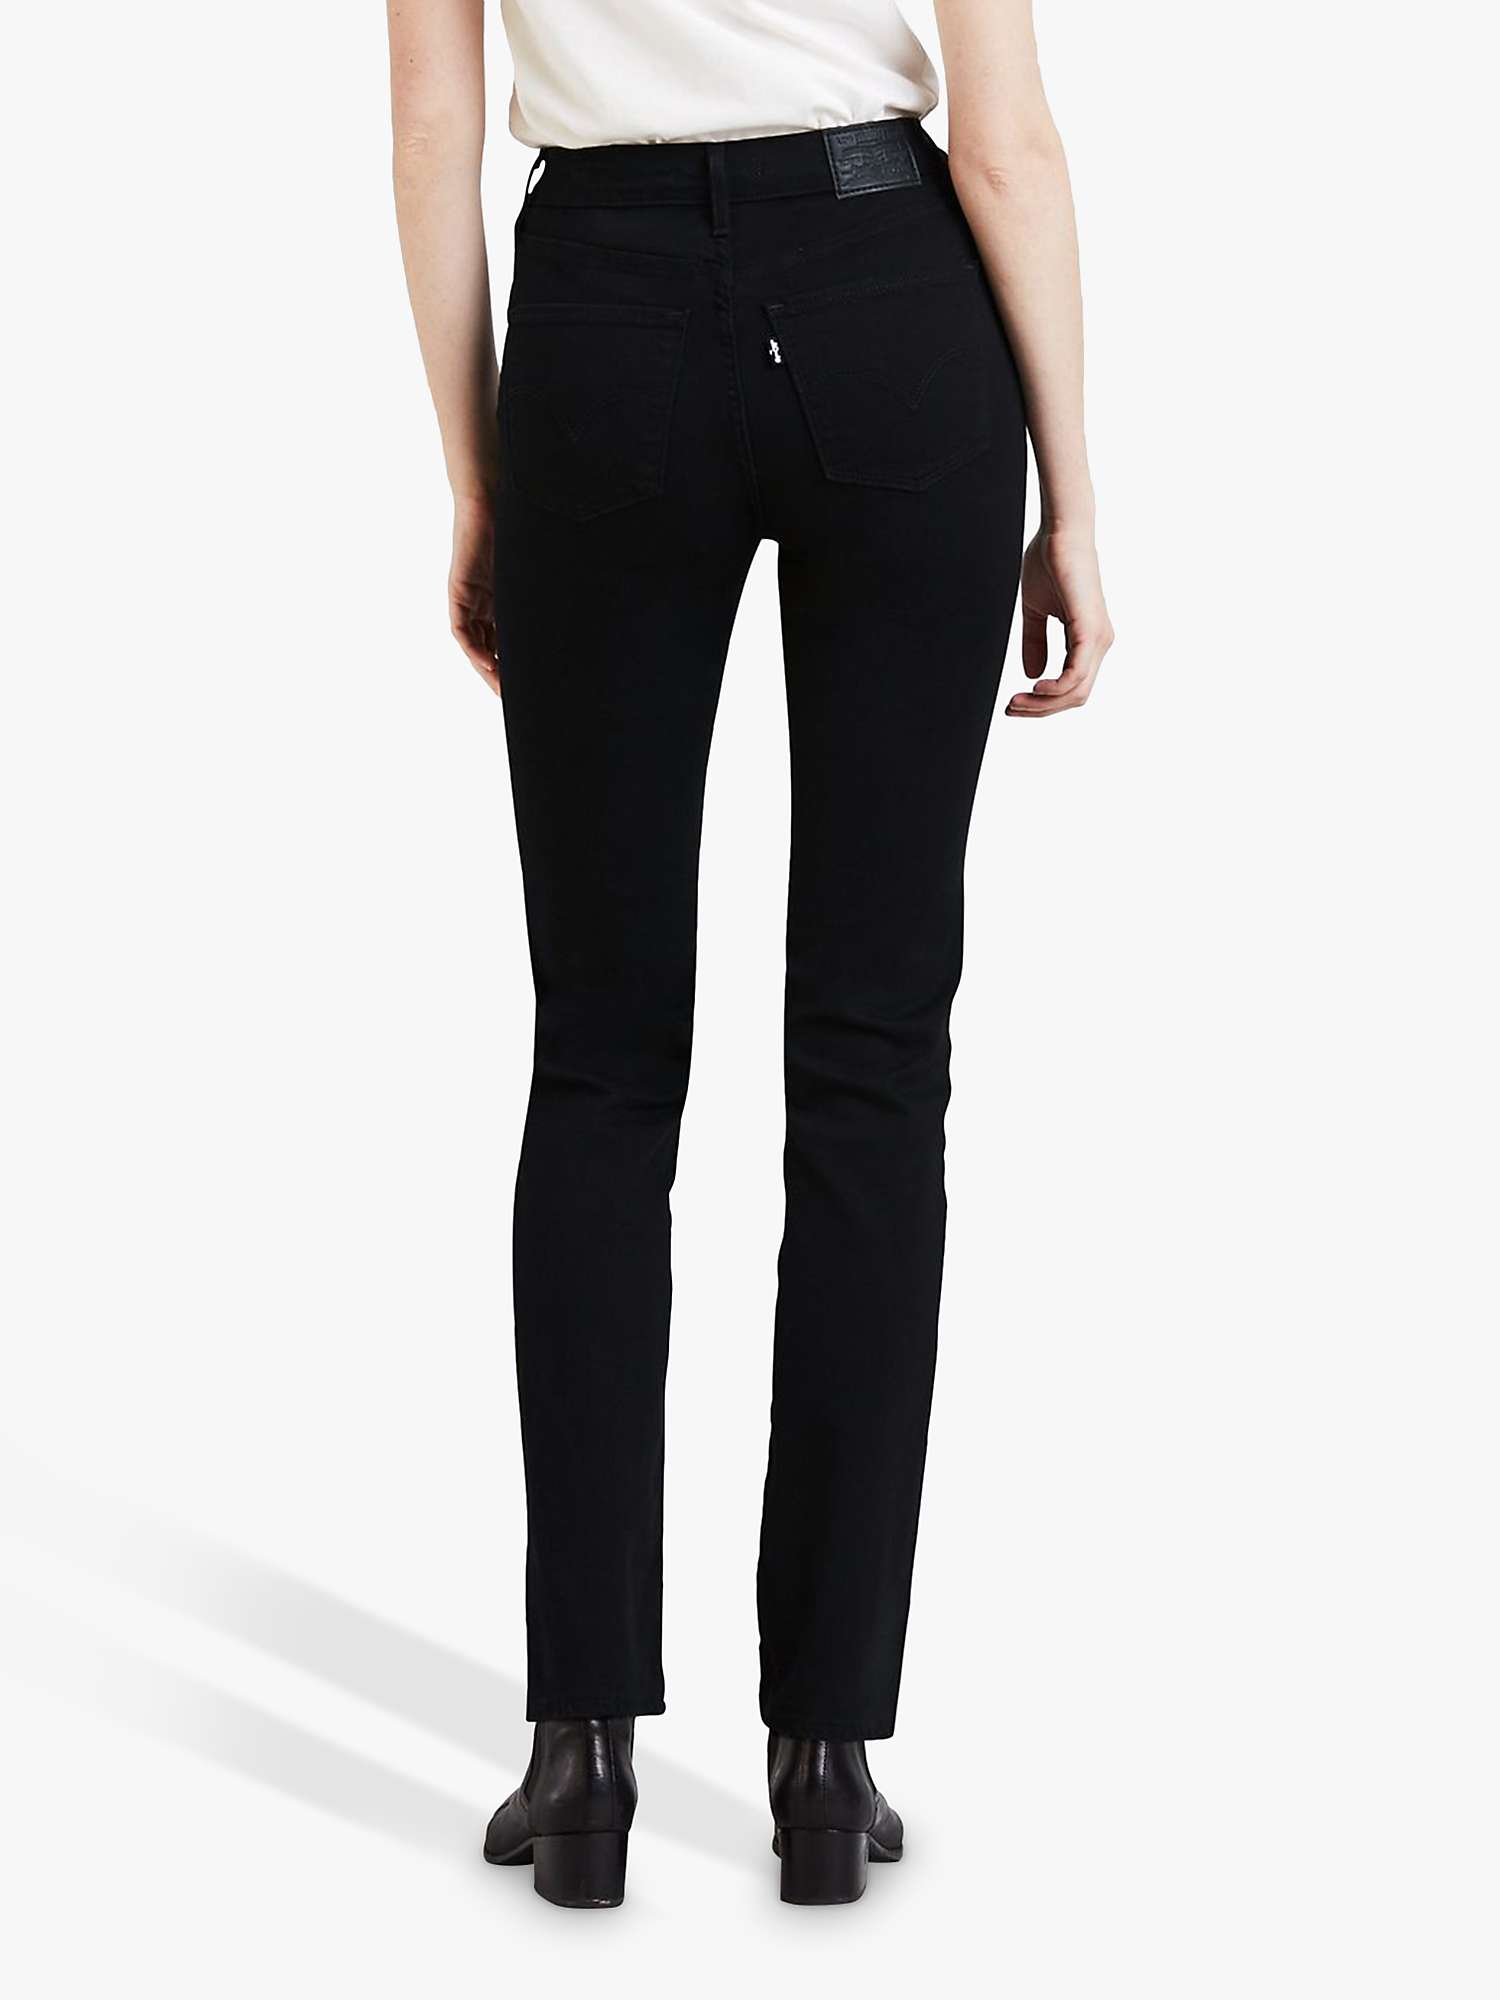 Buy Levi's 724 High Rise Straight Cut Jeans, Night Is Black Online at johnlewis.com